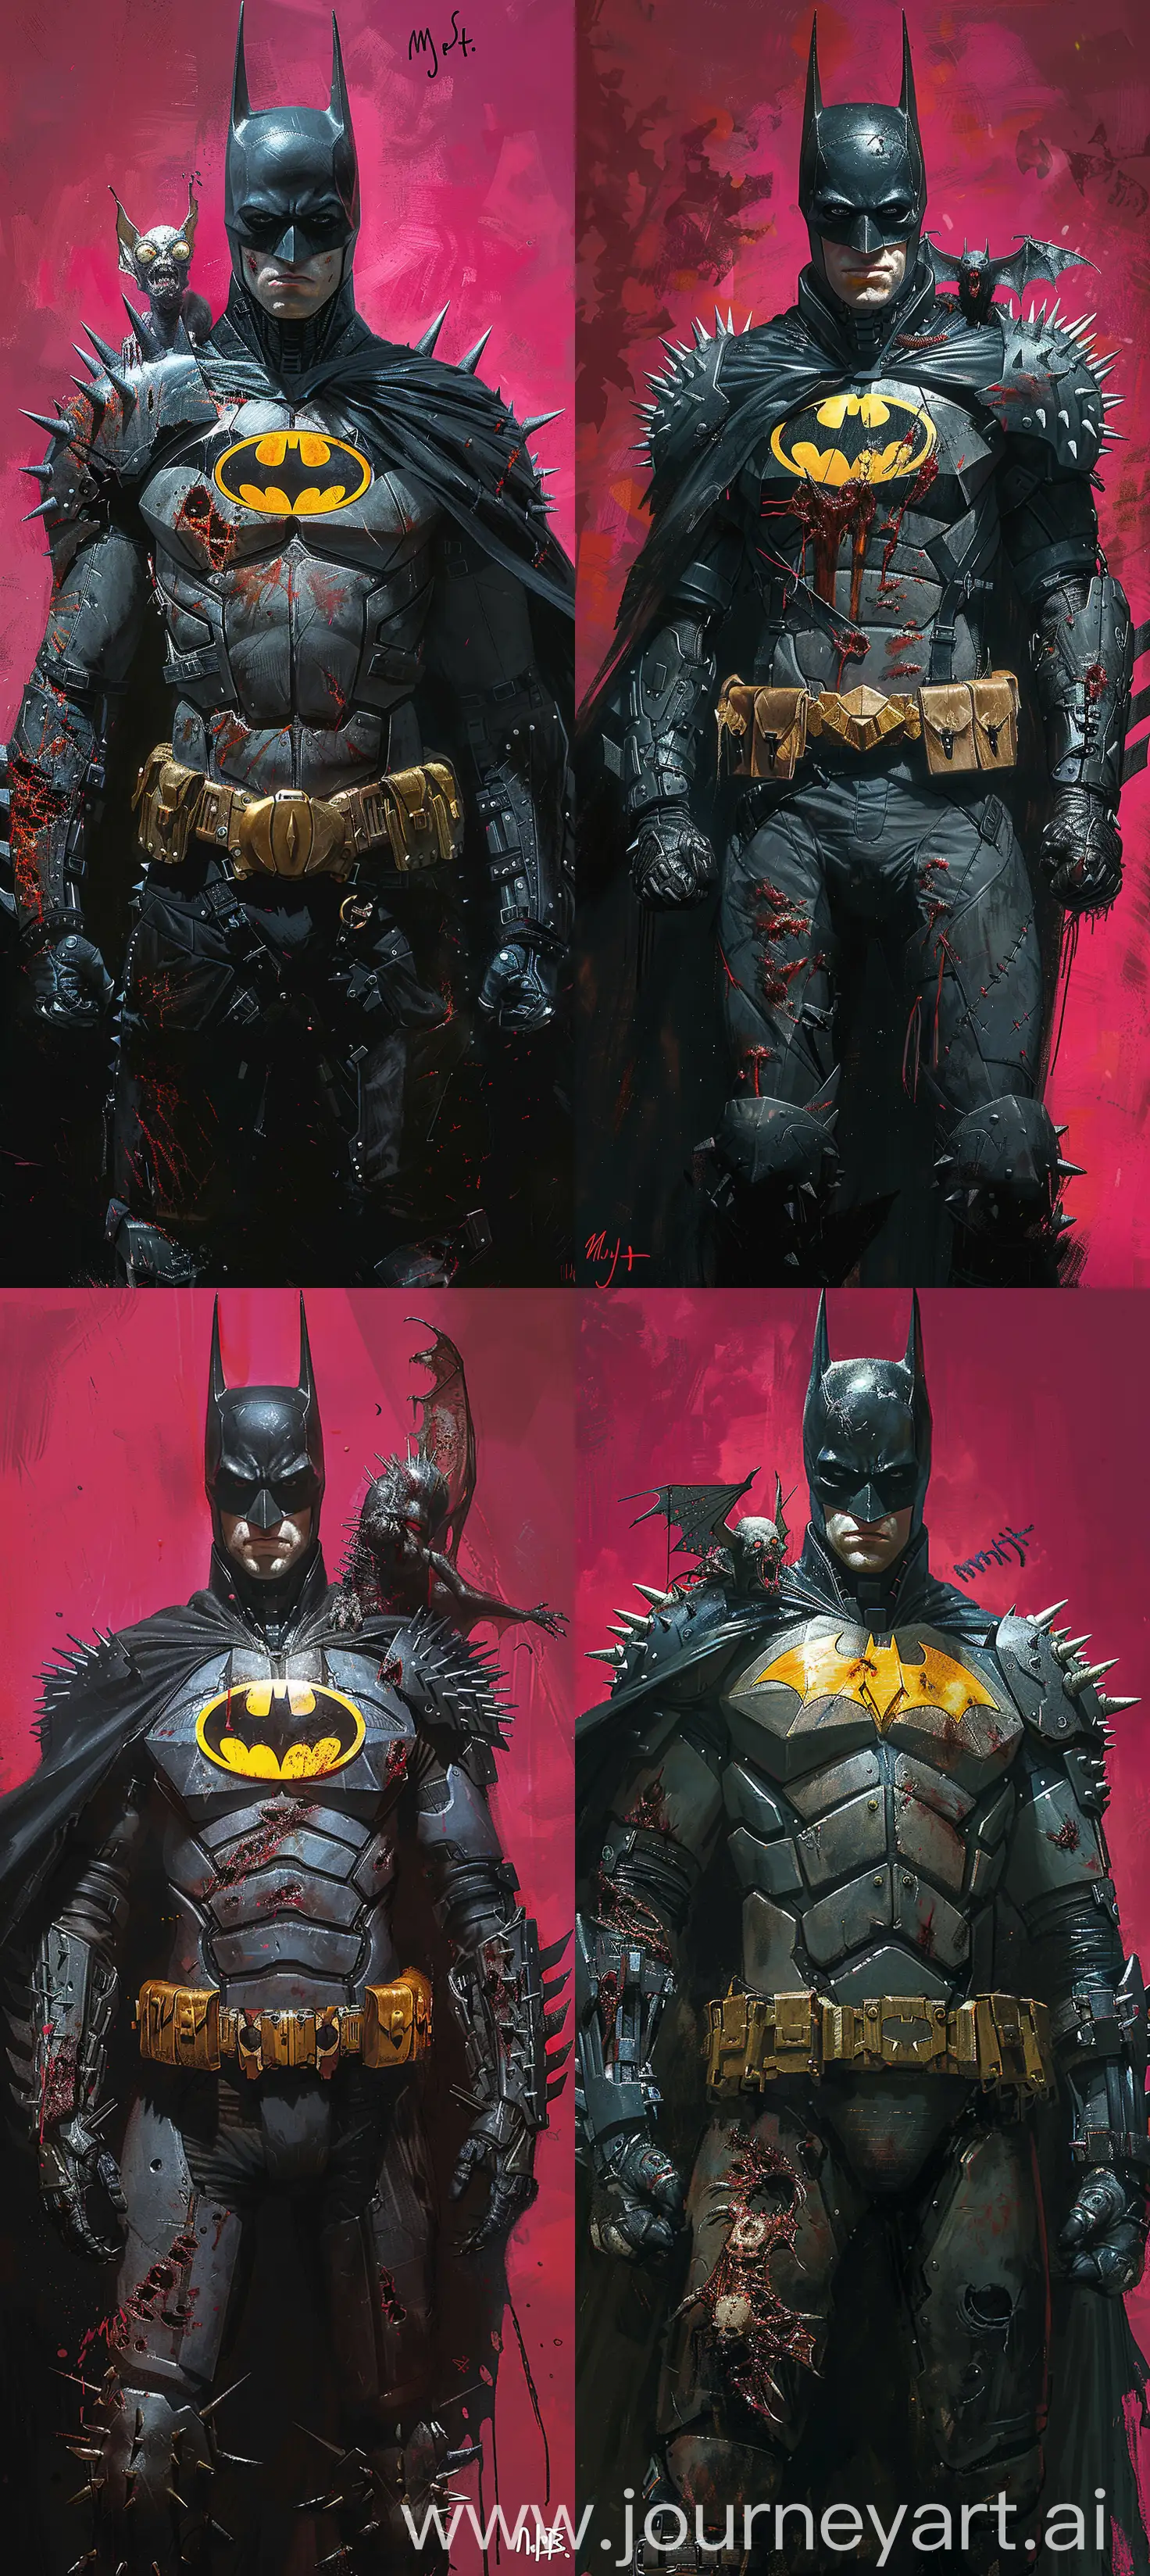 !mj1 Menacing armored Batman with spikes, dark aesthetic, yellow-black zombie bat insignia on chest, utility belt with Batarangs, flowing black cape, eerie bat creature on shoulder, bright magenta background, dark tones with vibrant contrast, rugged textures, artist's signature, sinister mood --cref https://i.postimg.cc/mrdN1Lmf/Screenshot-2024-0526-160019.jpg --ar 57:128 --s 750 --v 6